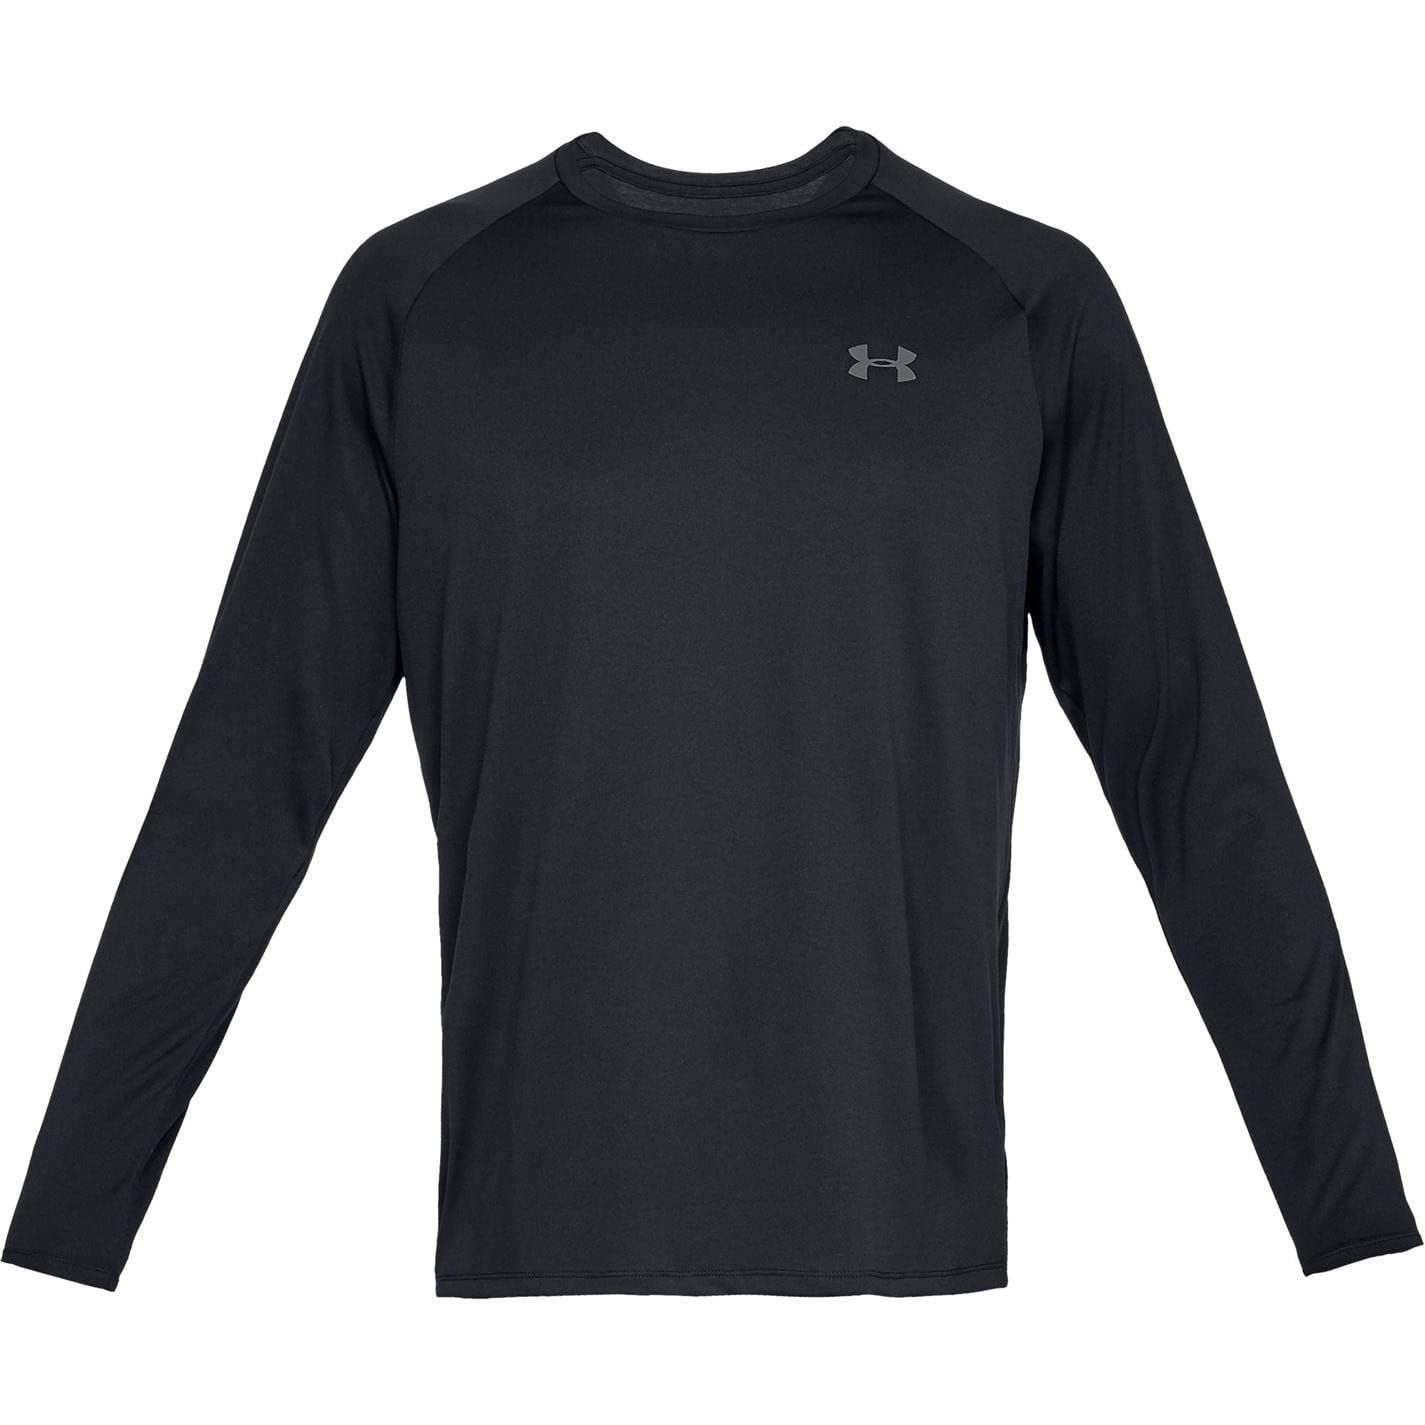 Under Armour Men's Tech 2.0 Long Sleeve T-Shirt (Black, XS & XXL) $12.97 + Free Shipping w/ Prime or on orders $35+